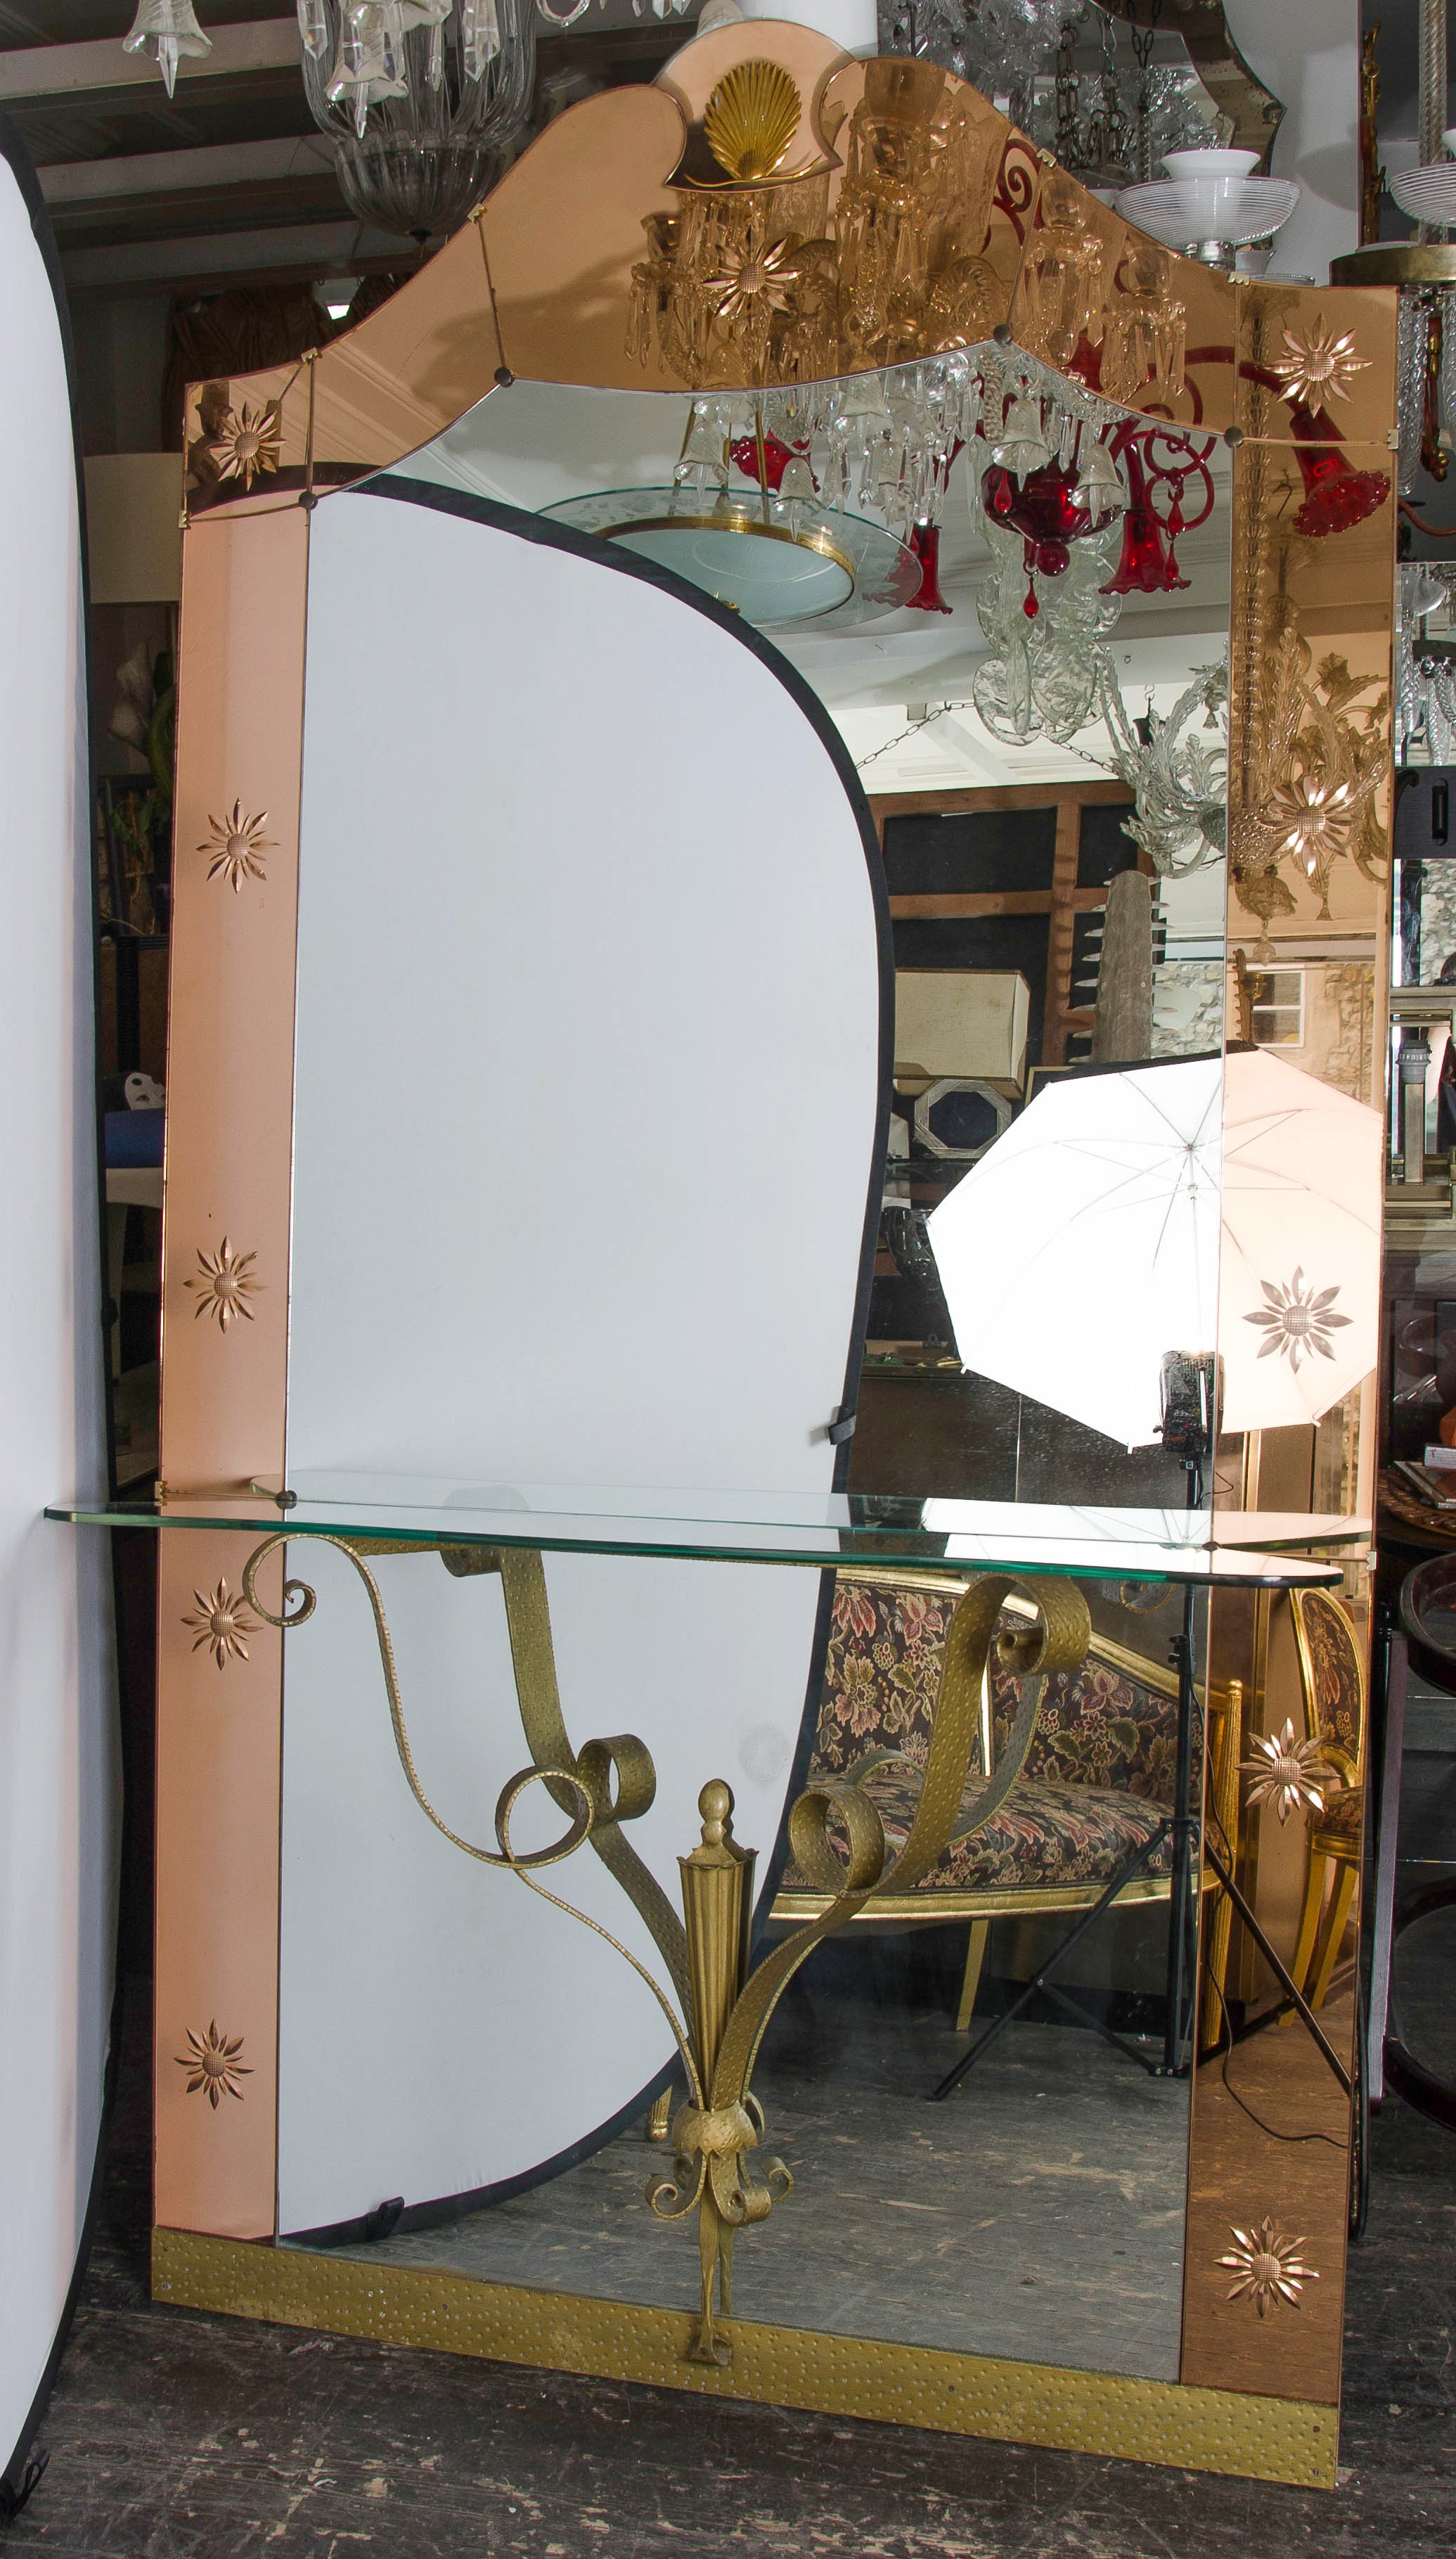 1930s Italian Hollywood Regency Mirror with Attached Brass Console